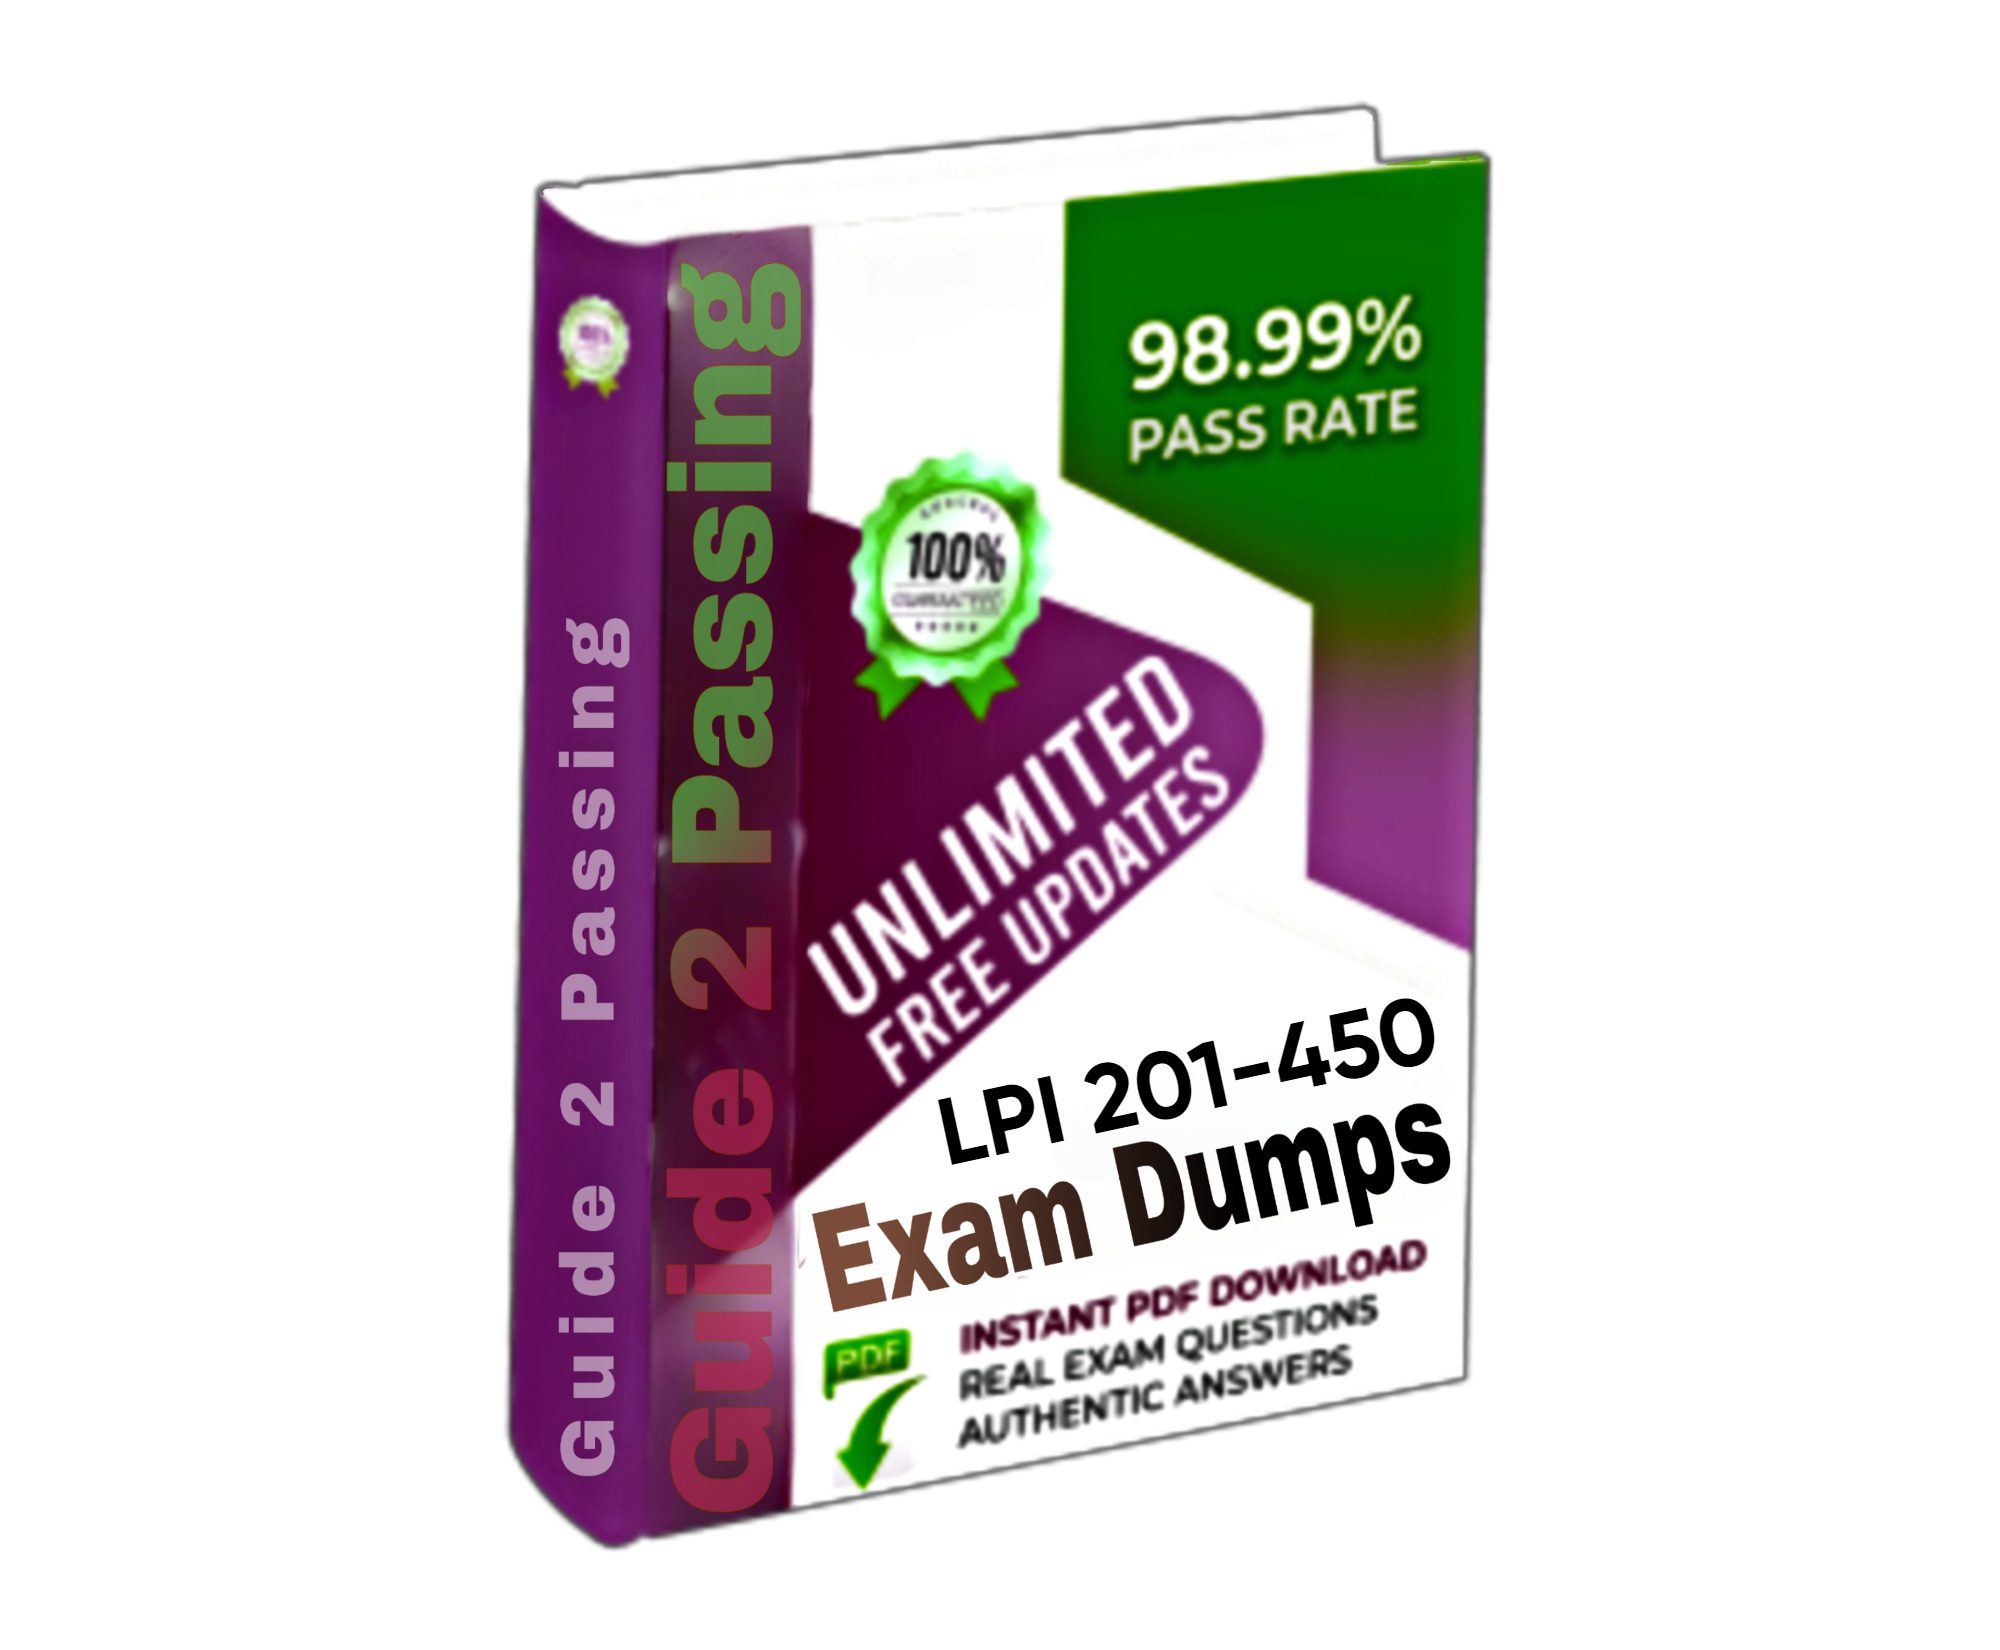 Pass Your LPI 201-450 Exam Dumps From Guide 2 Passing